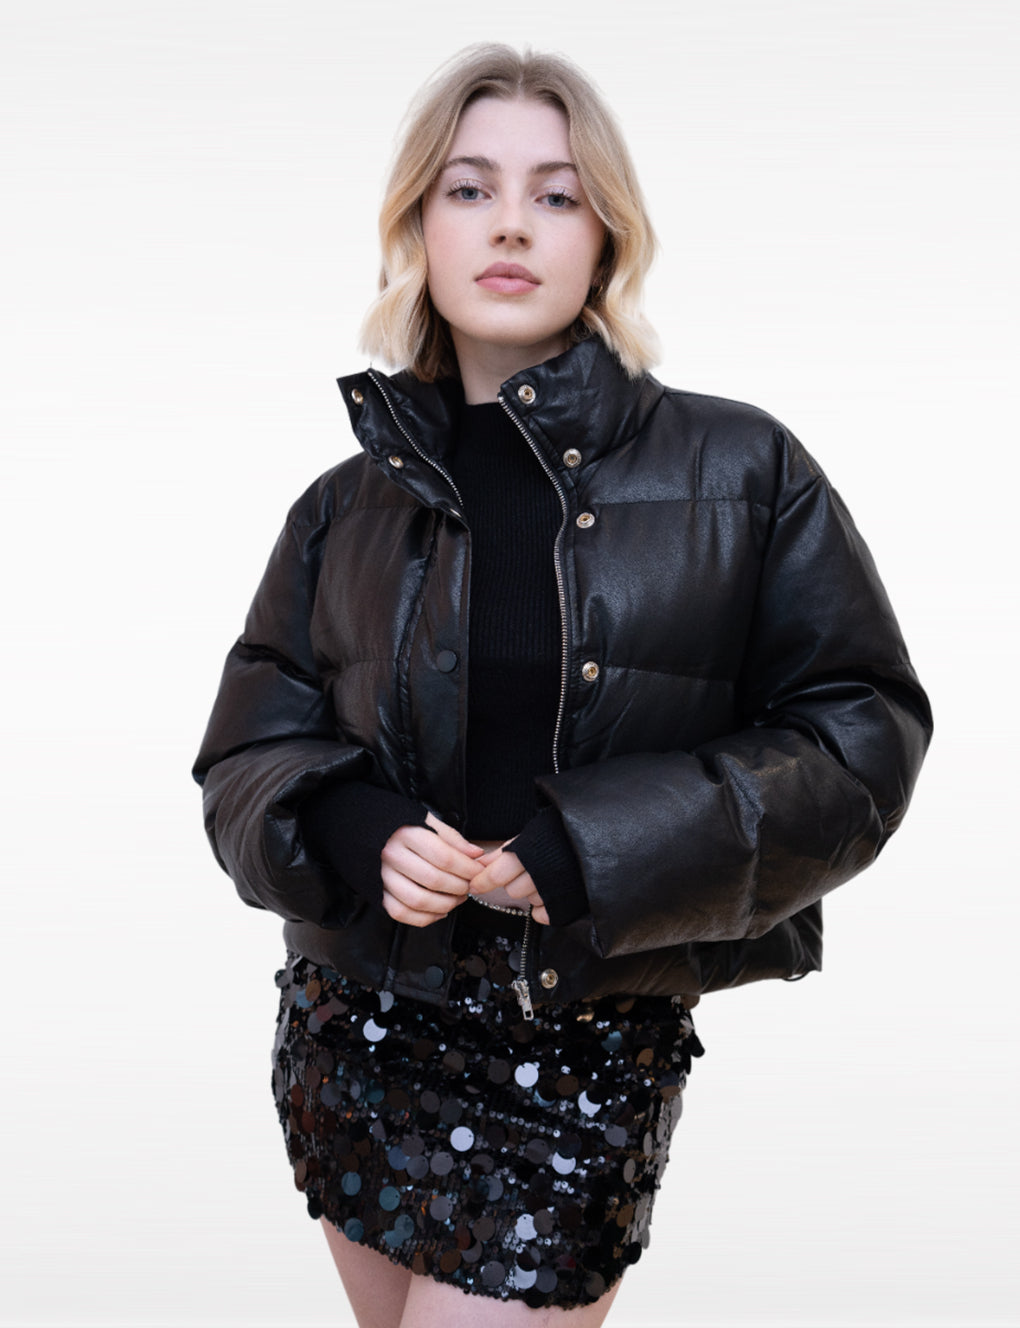 Black Leather Cotton-Filled Puffer Jacket